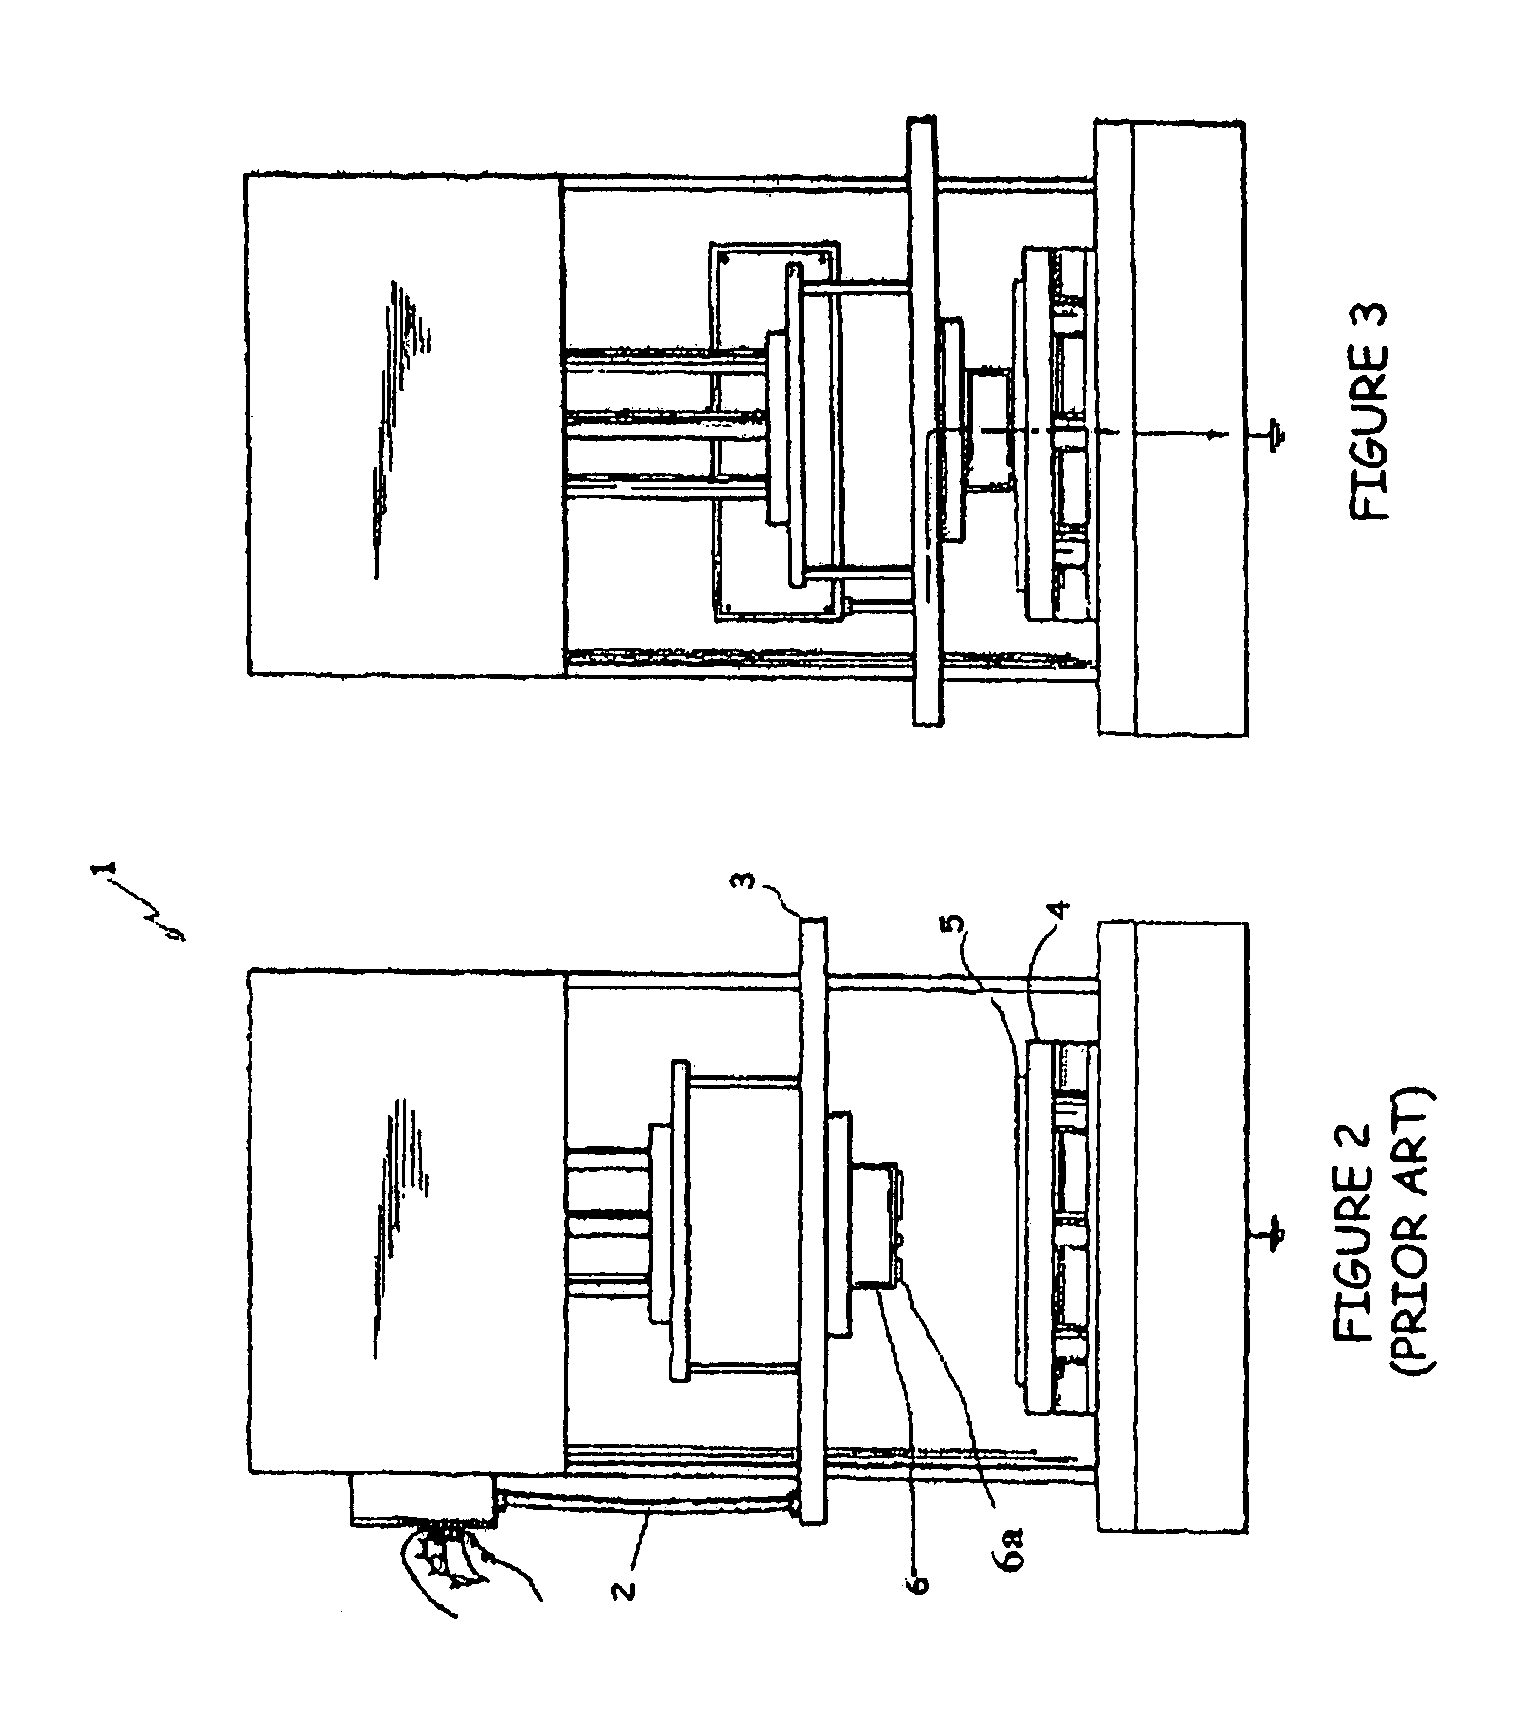 RF welding device with filtering and tuning